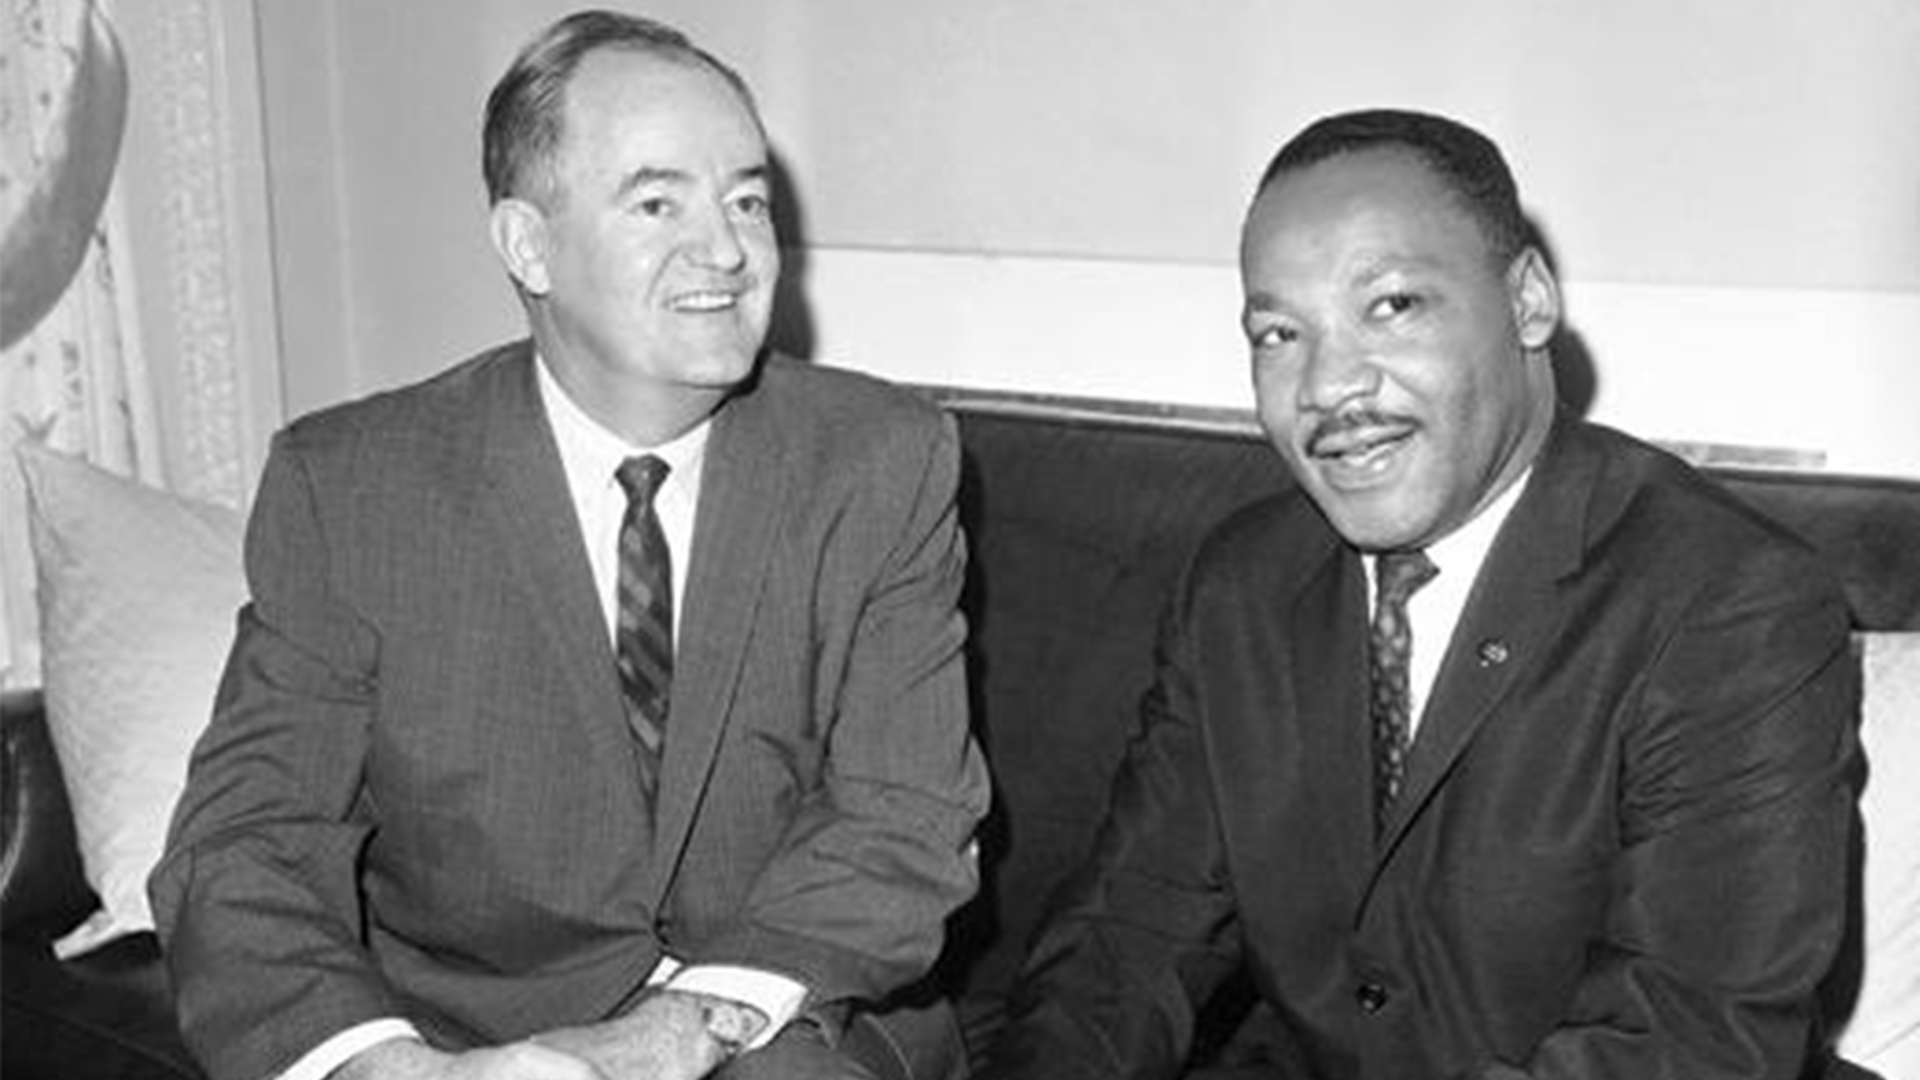 Hubert H. Humphrey and Martin Luther King Jr. sit together and smile at someone off-camera